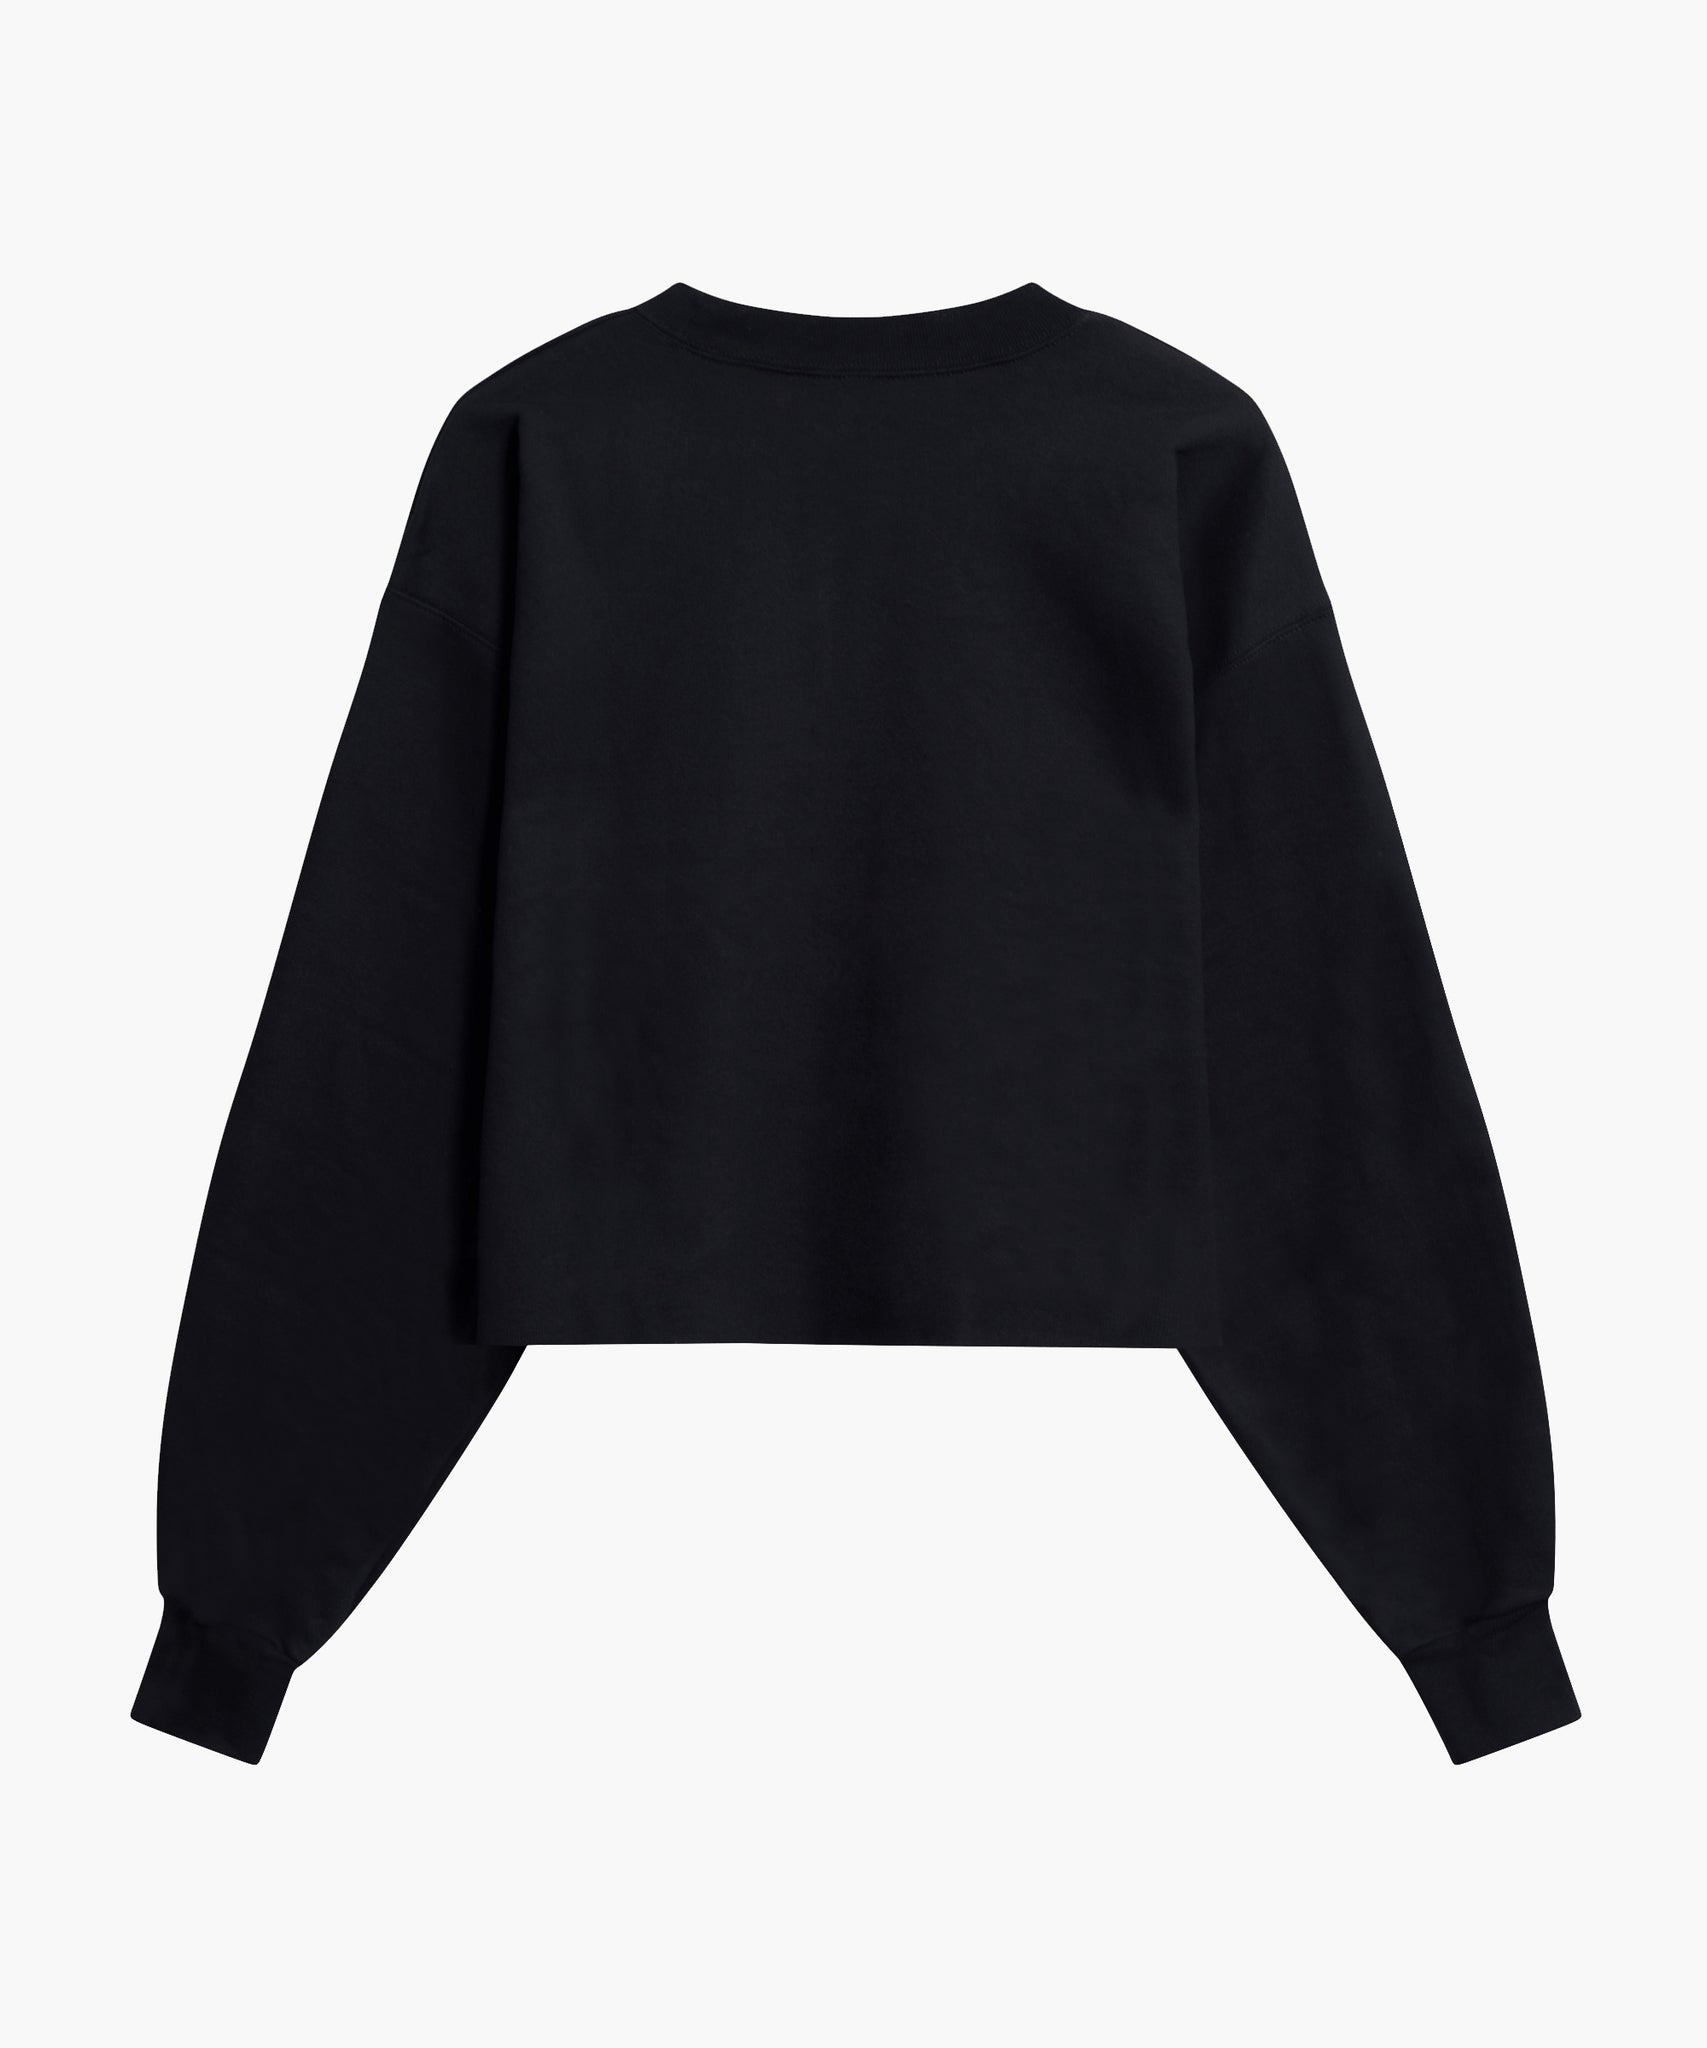 her Productions Cropped Crewneck - Black